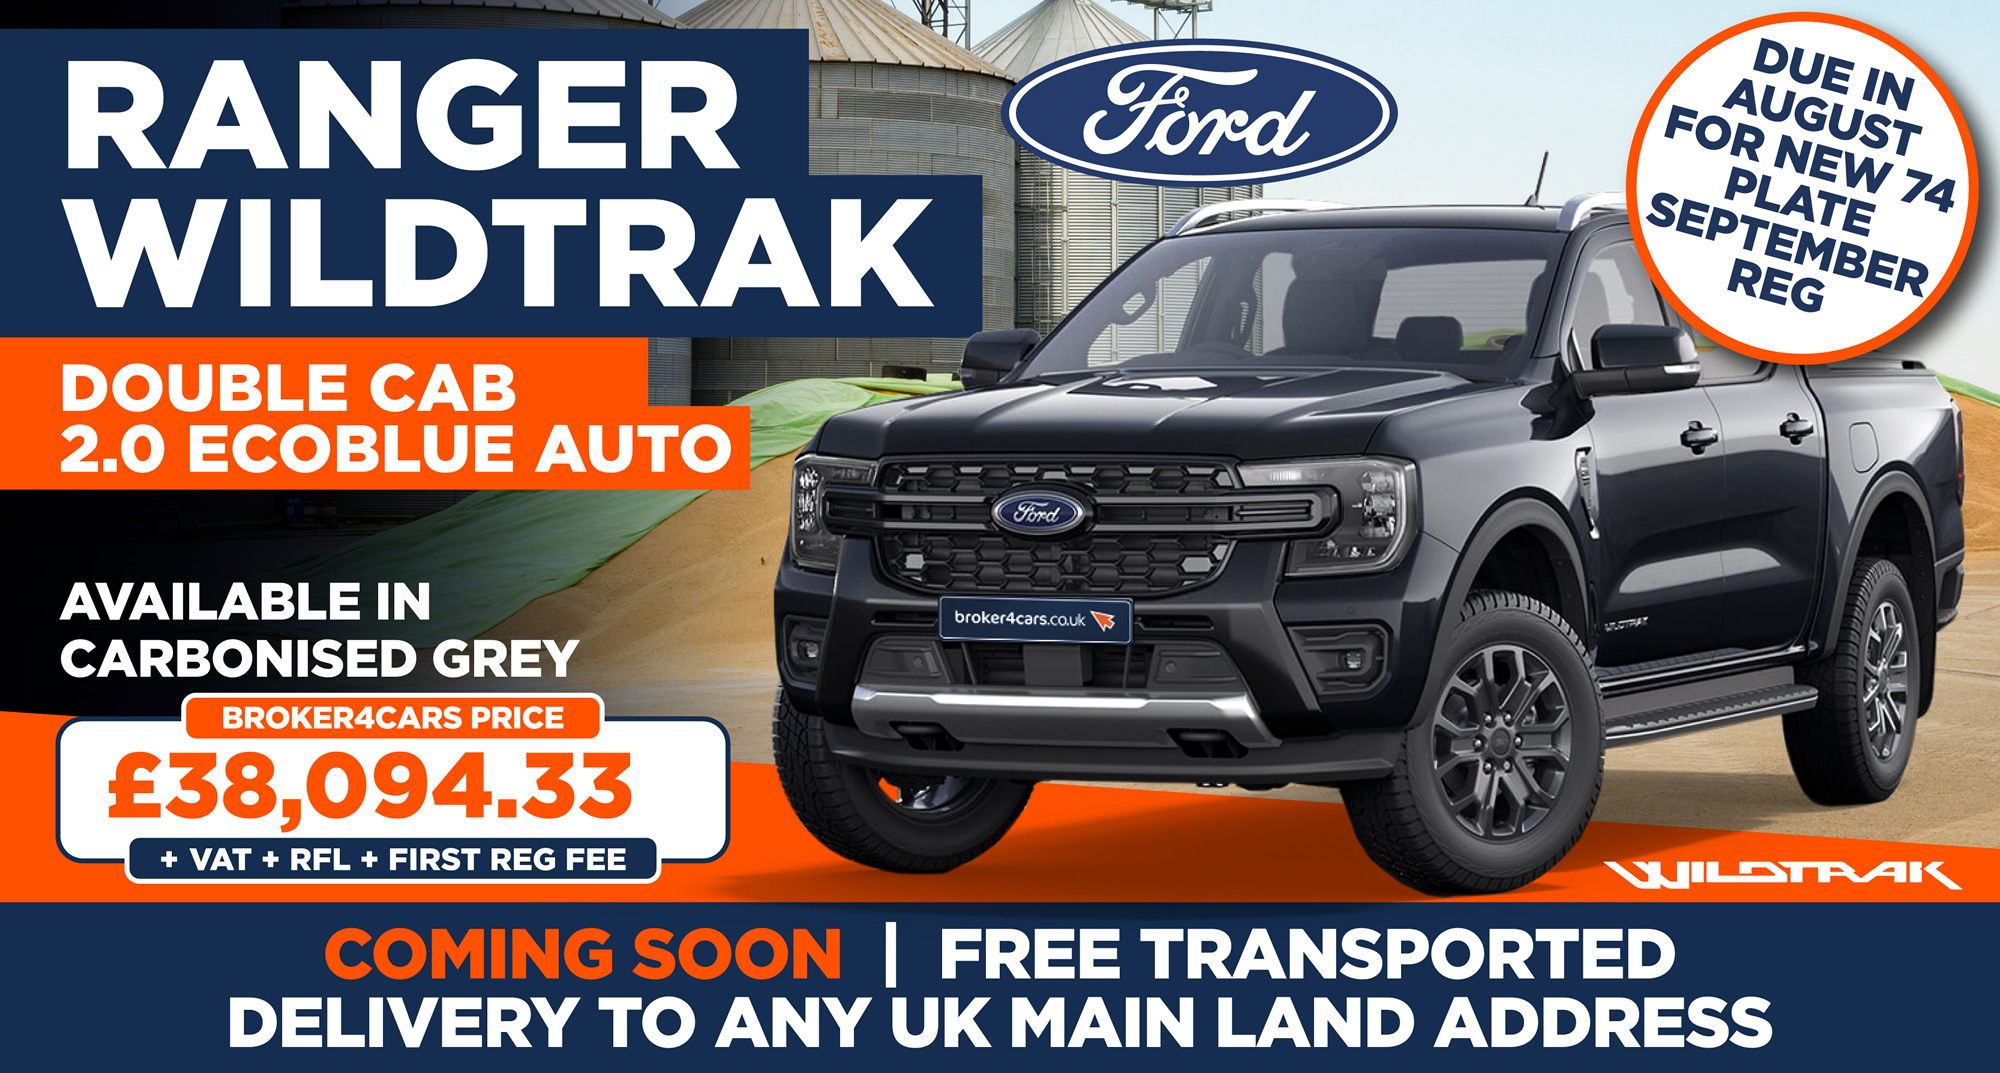 Ranger Wildtrak Double Cab 2.0 Ecoblue Auto. Available in Carbonised Grey